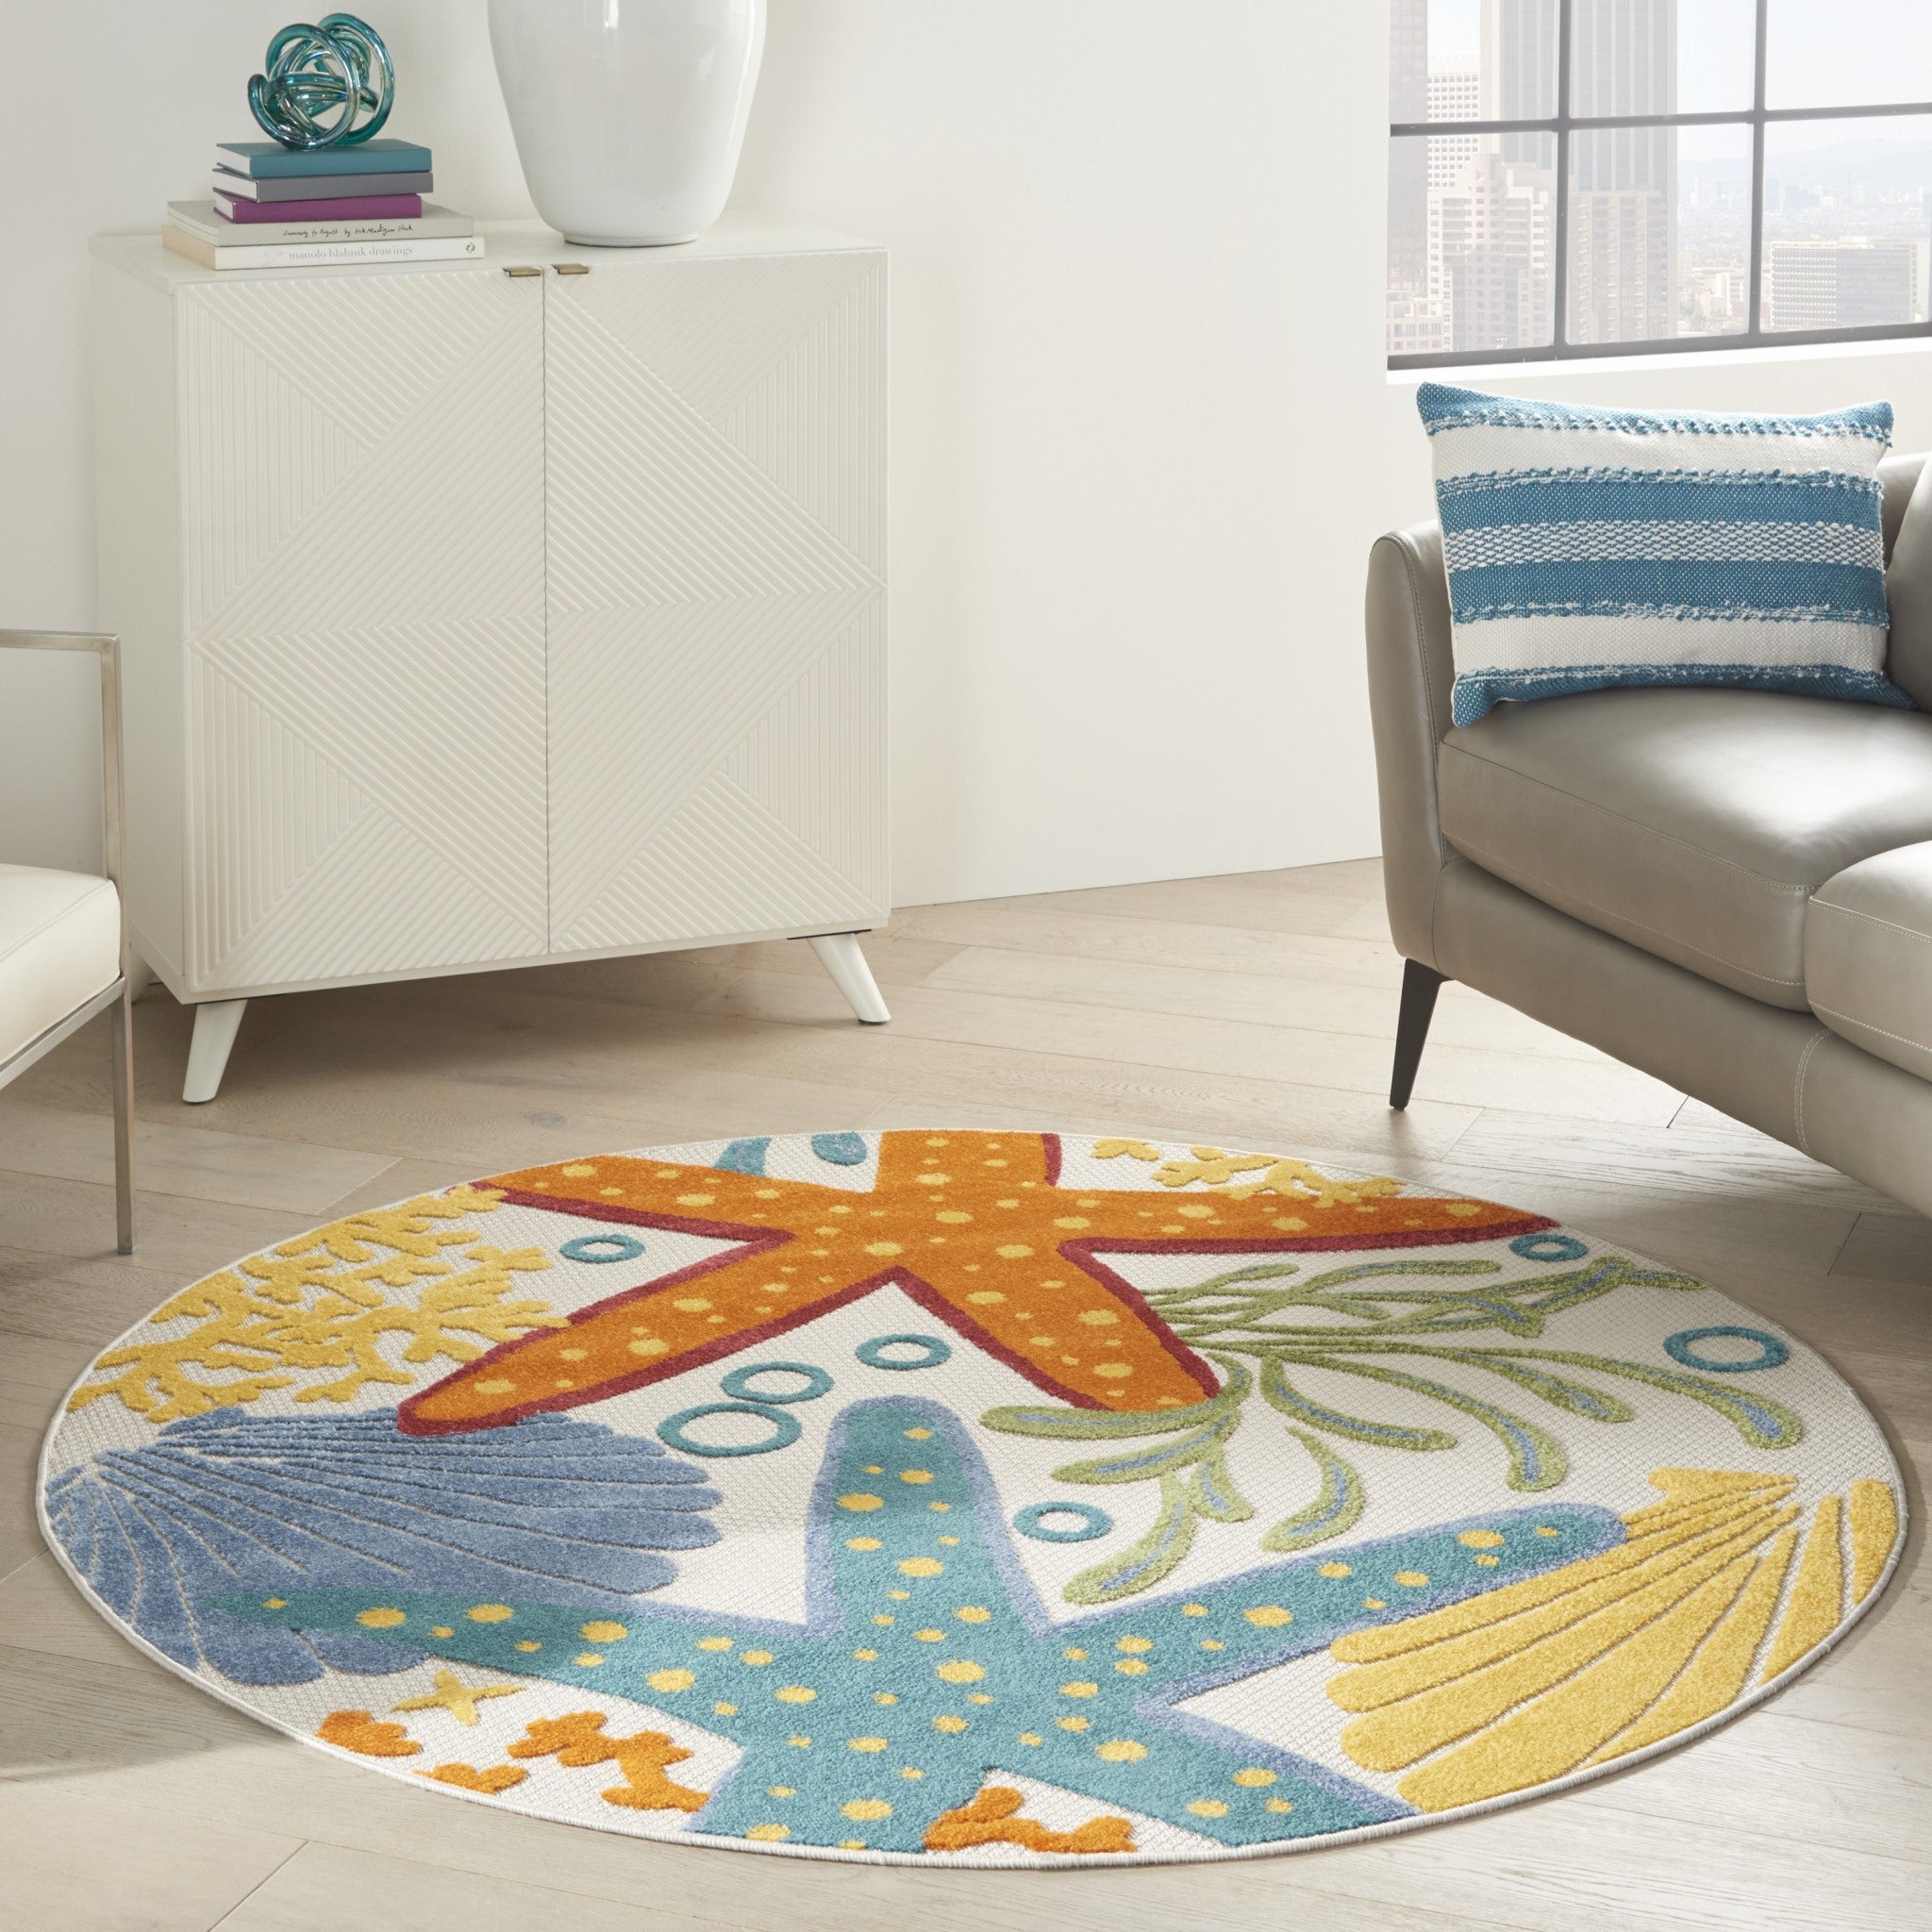 4' Round Yellow And Ivory Round Indoor Outdoor Area Rug